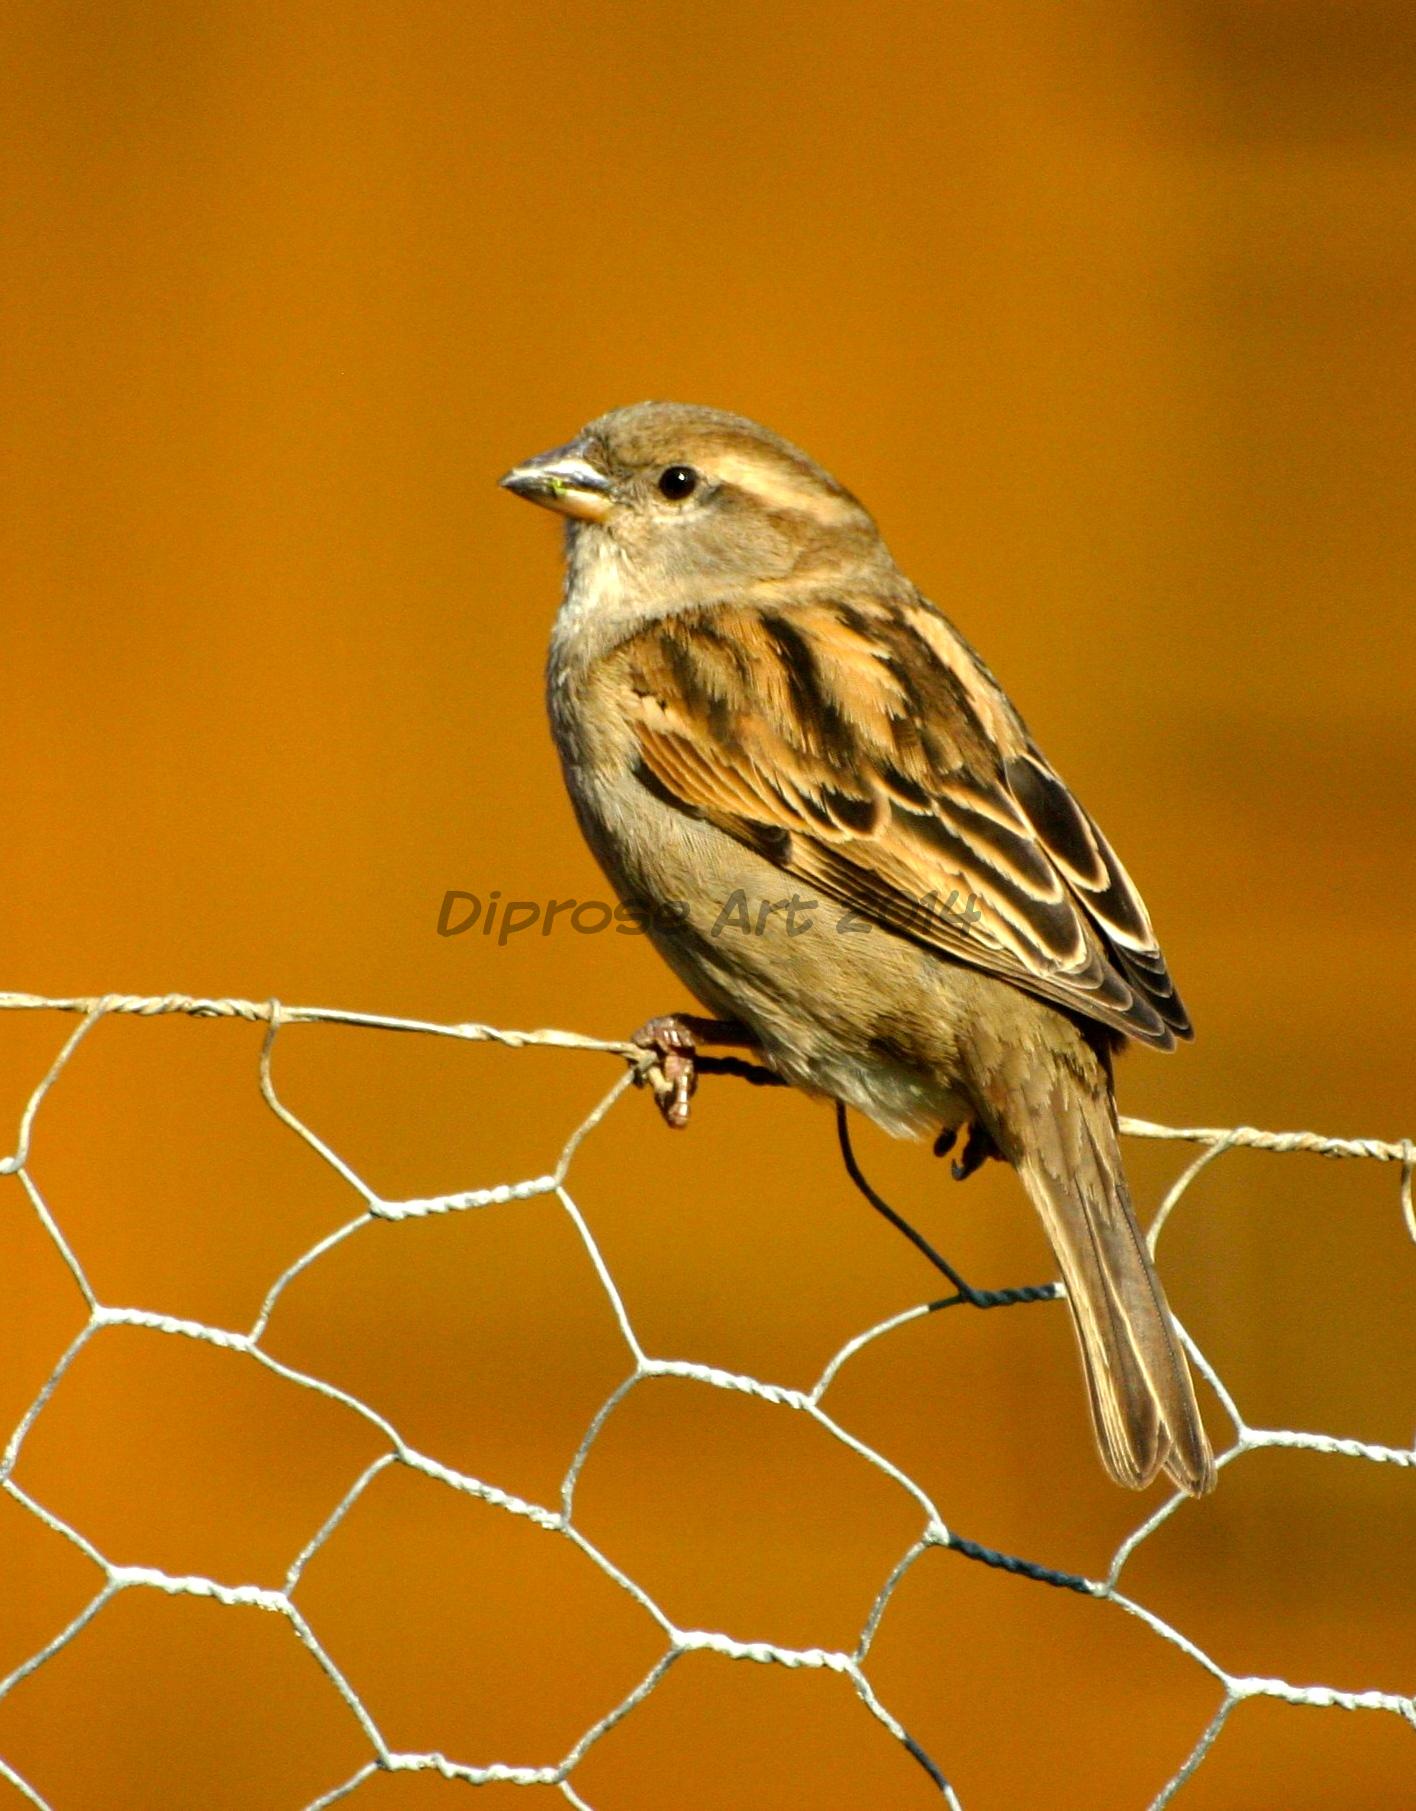 female house sparrow this time - does this make her a Housewife Sparrow?